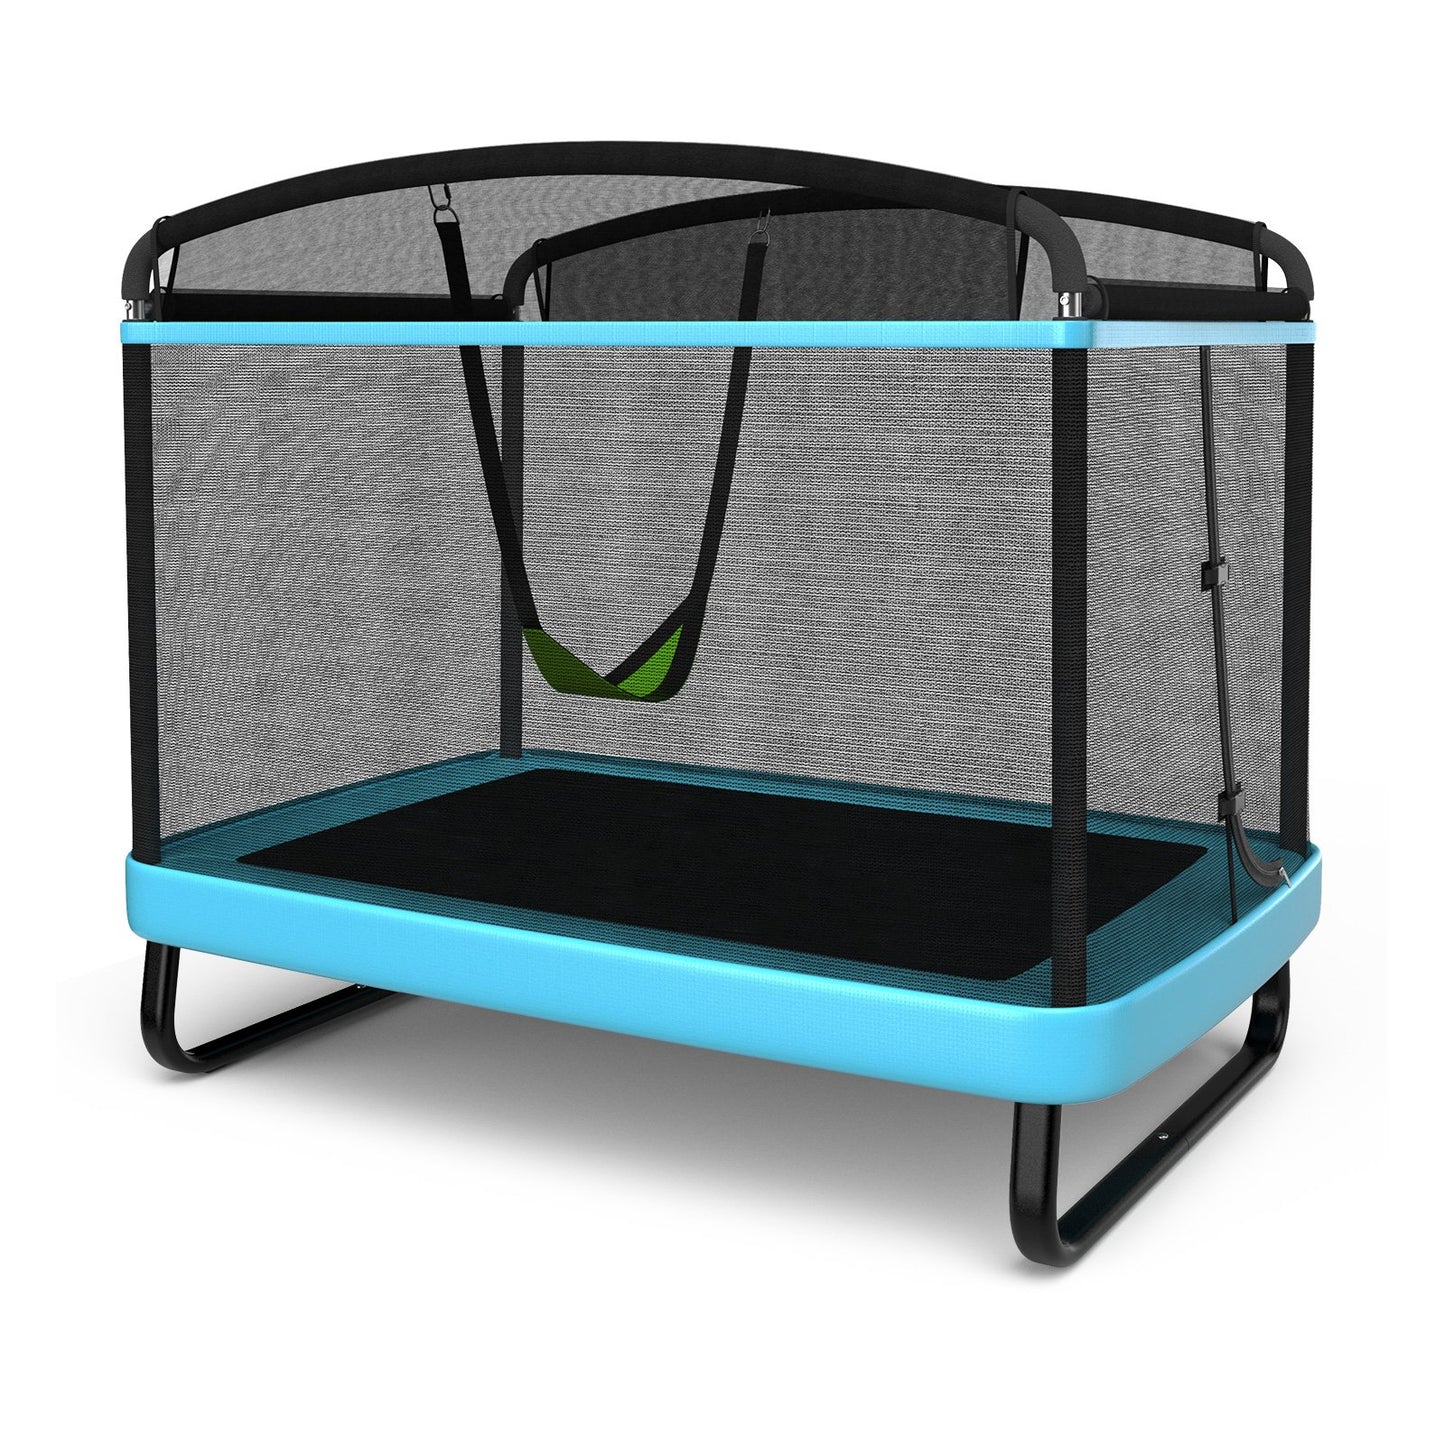 6 Feet Kids Entertaining Trampoline with Swing Safety Fence, Blue - Gallery Canada